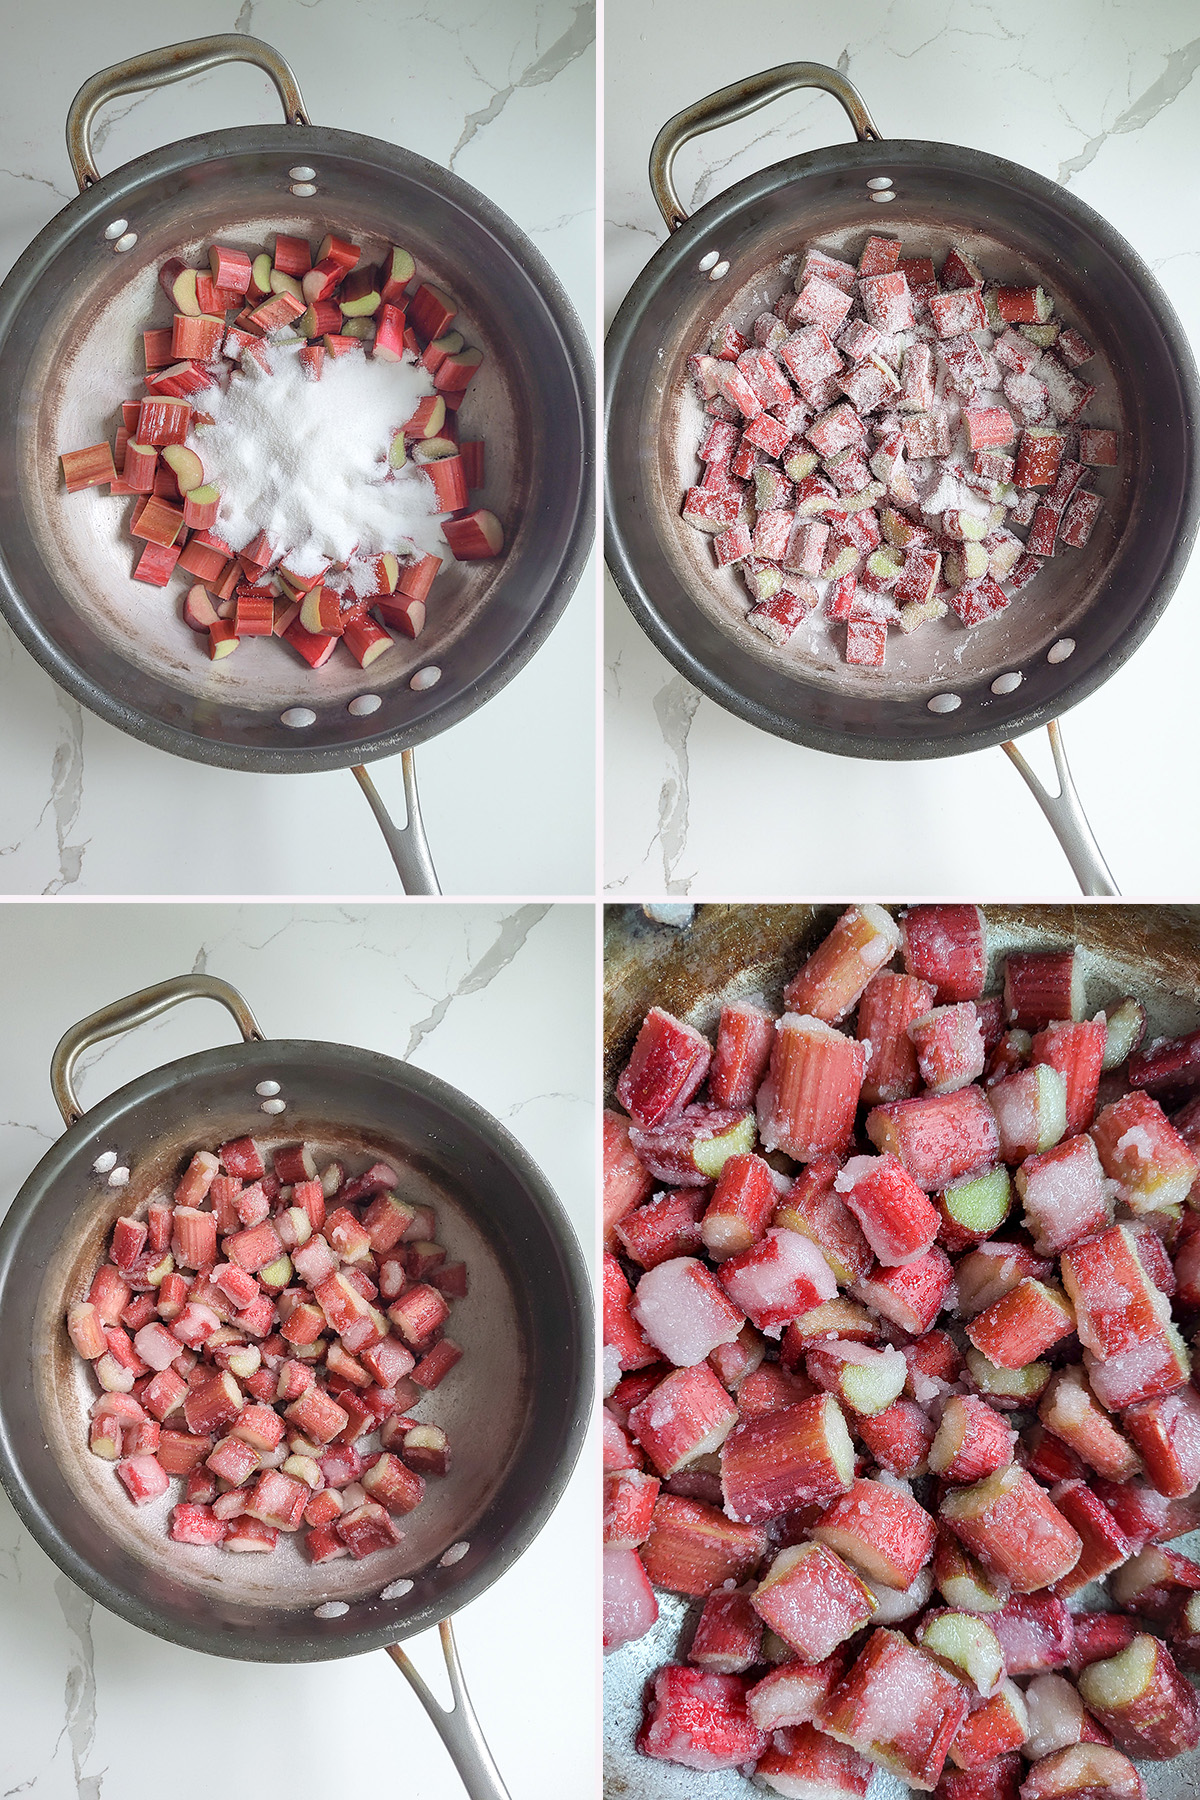 four photos showing rhubarb with  sugar as it macerates.